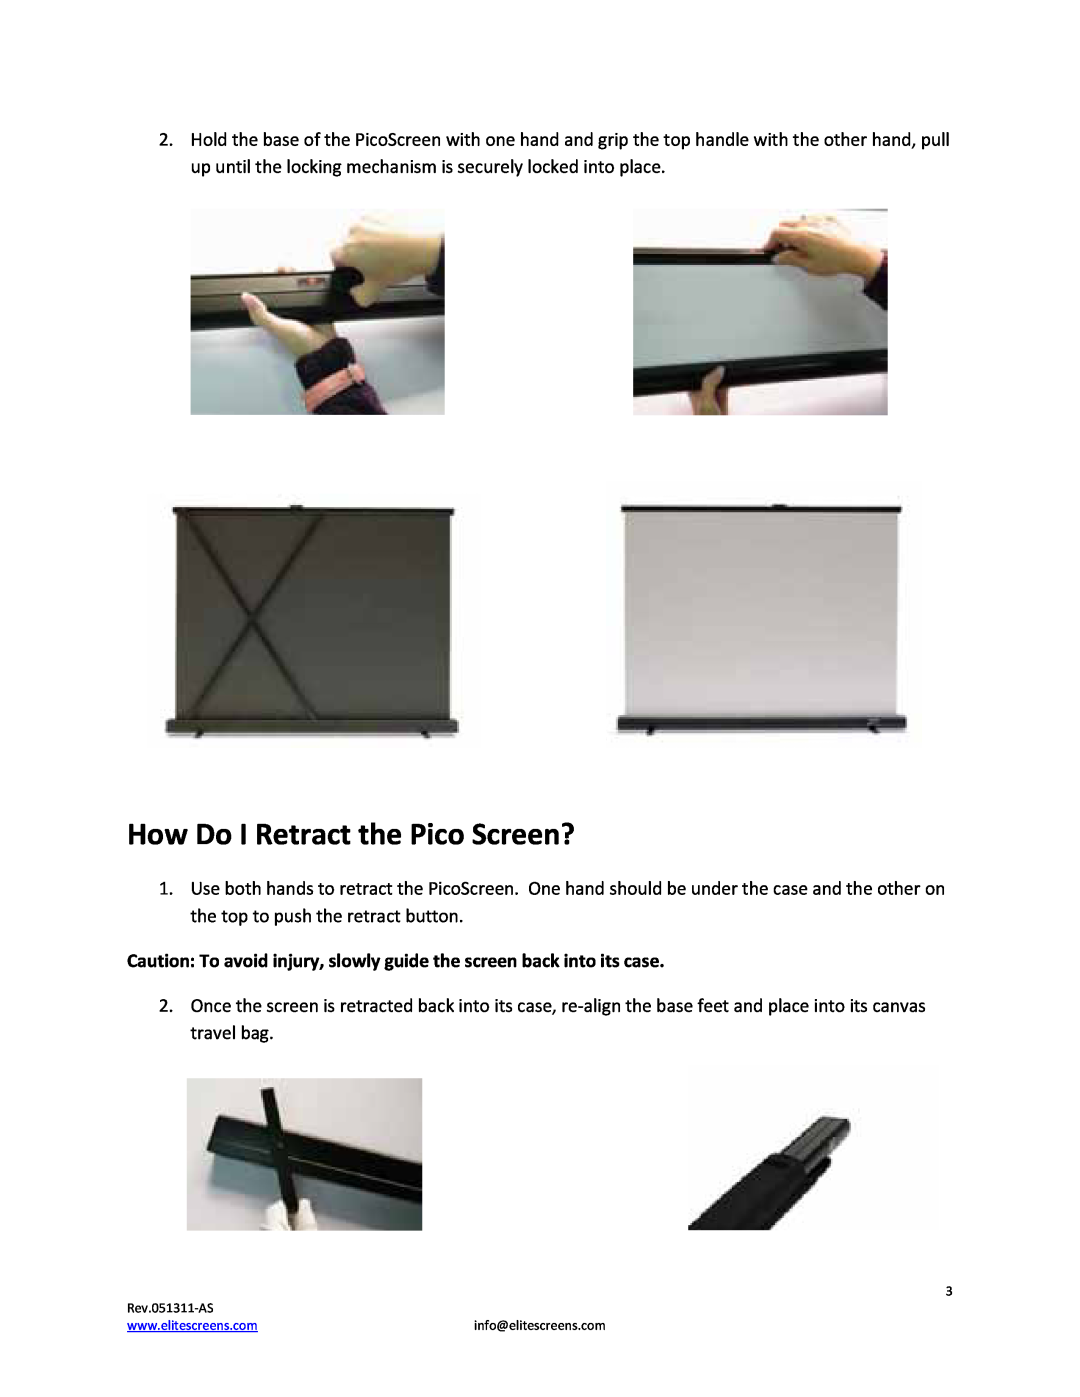 Elite Screens How Do I Retract the Pico Screen?, Caution To avoid injury, slowly guide the screen back into its case 